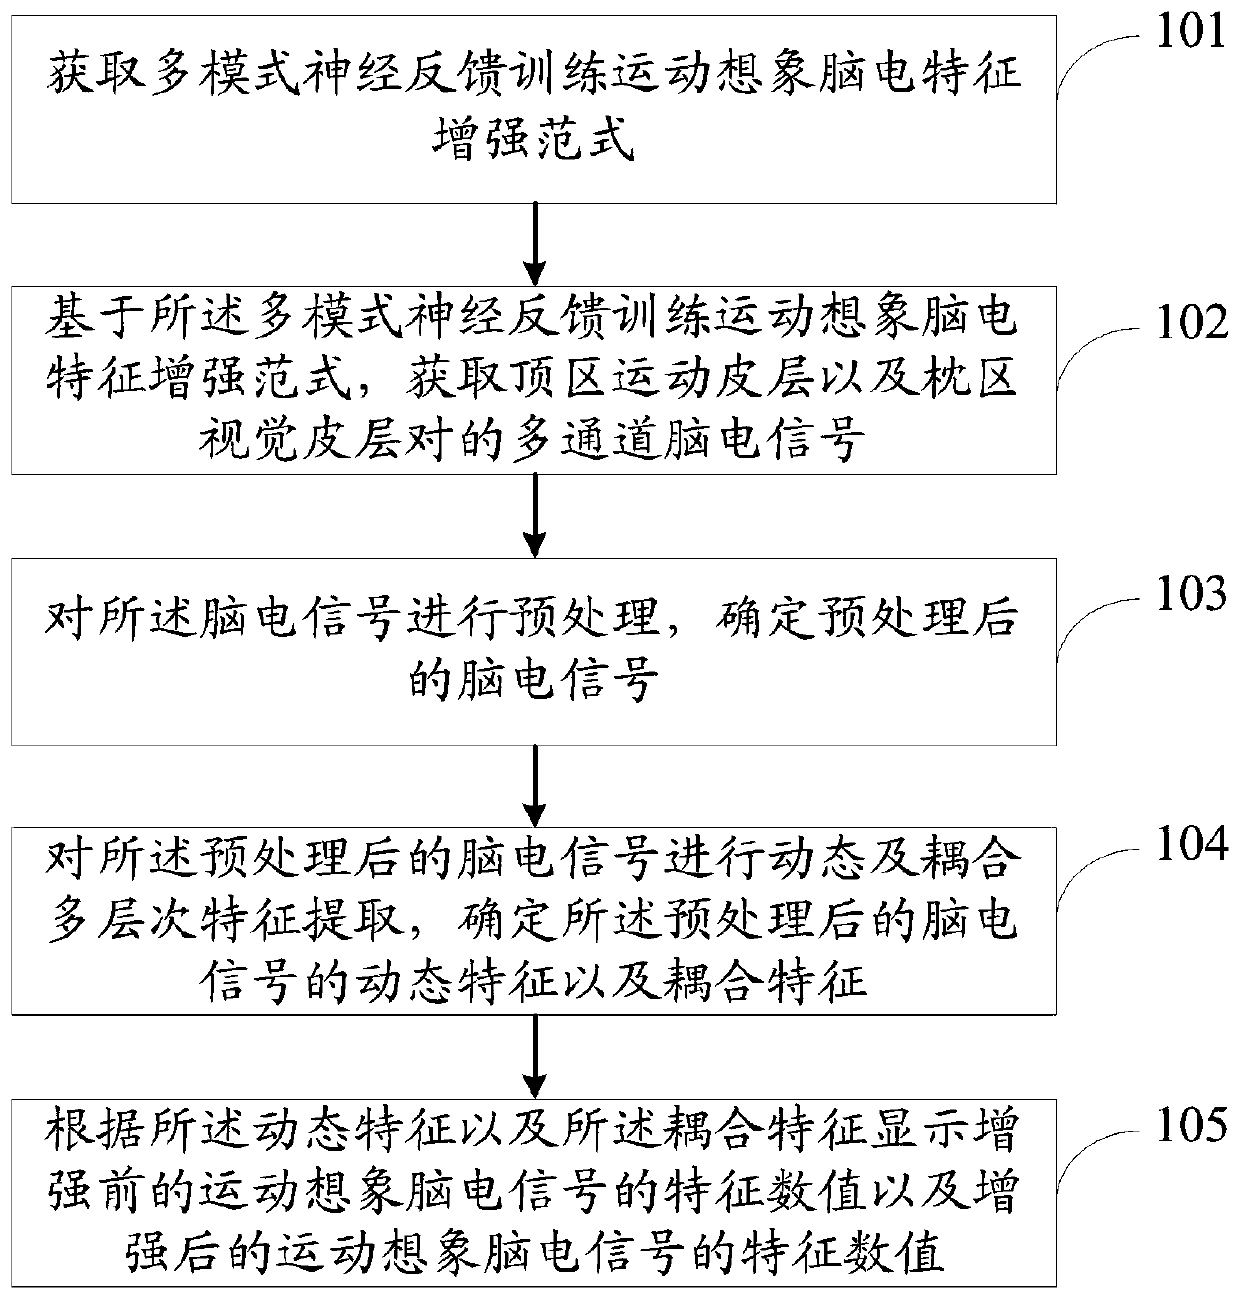 Motor imagery electroencephalogram feature enhancement method and system